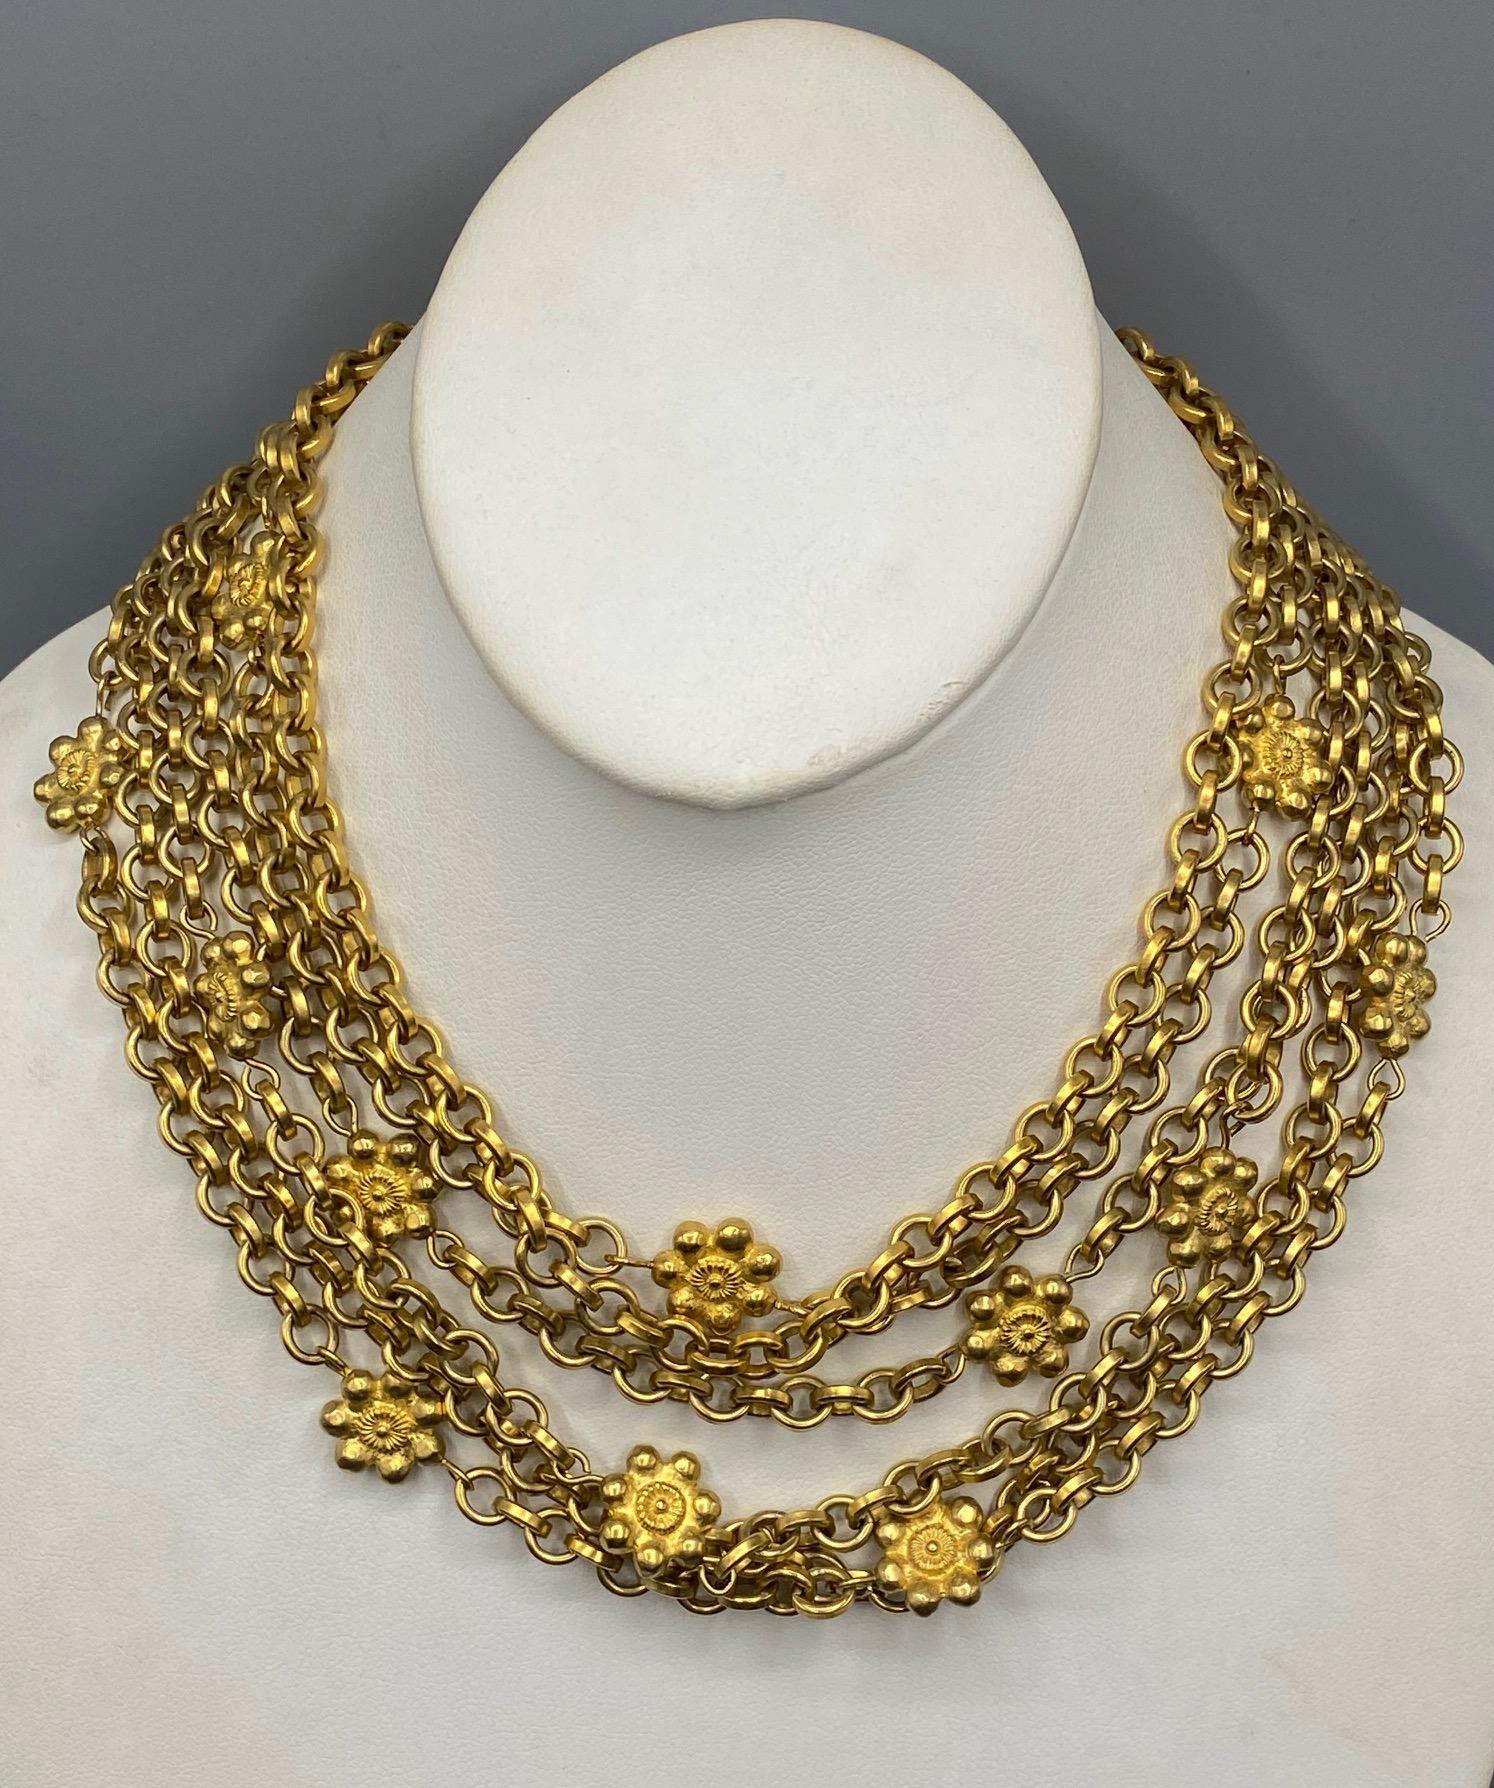 A wonderful 1980s six strand short necklace by famous designer Karl Lagerfeld. In 1983 Lagerfeld joined the house of Chanel as head designer. In 1984, he launched his own label. Presented is a six strand satin gold chain necklace from the mid to